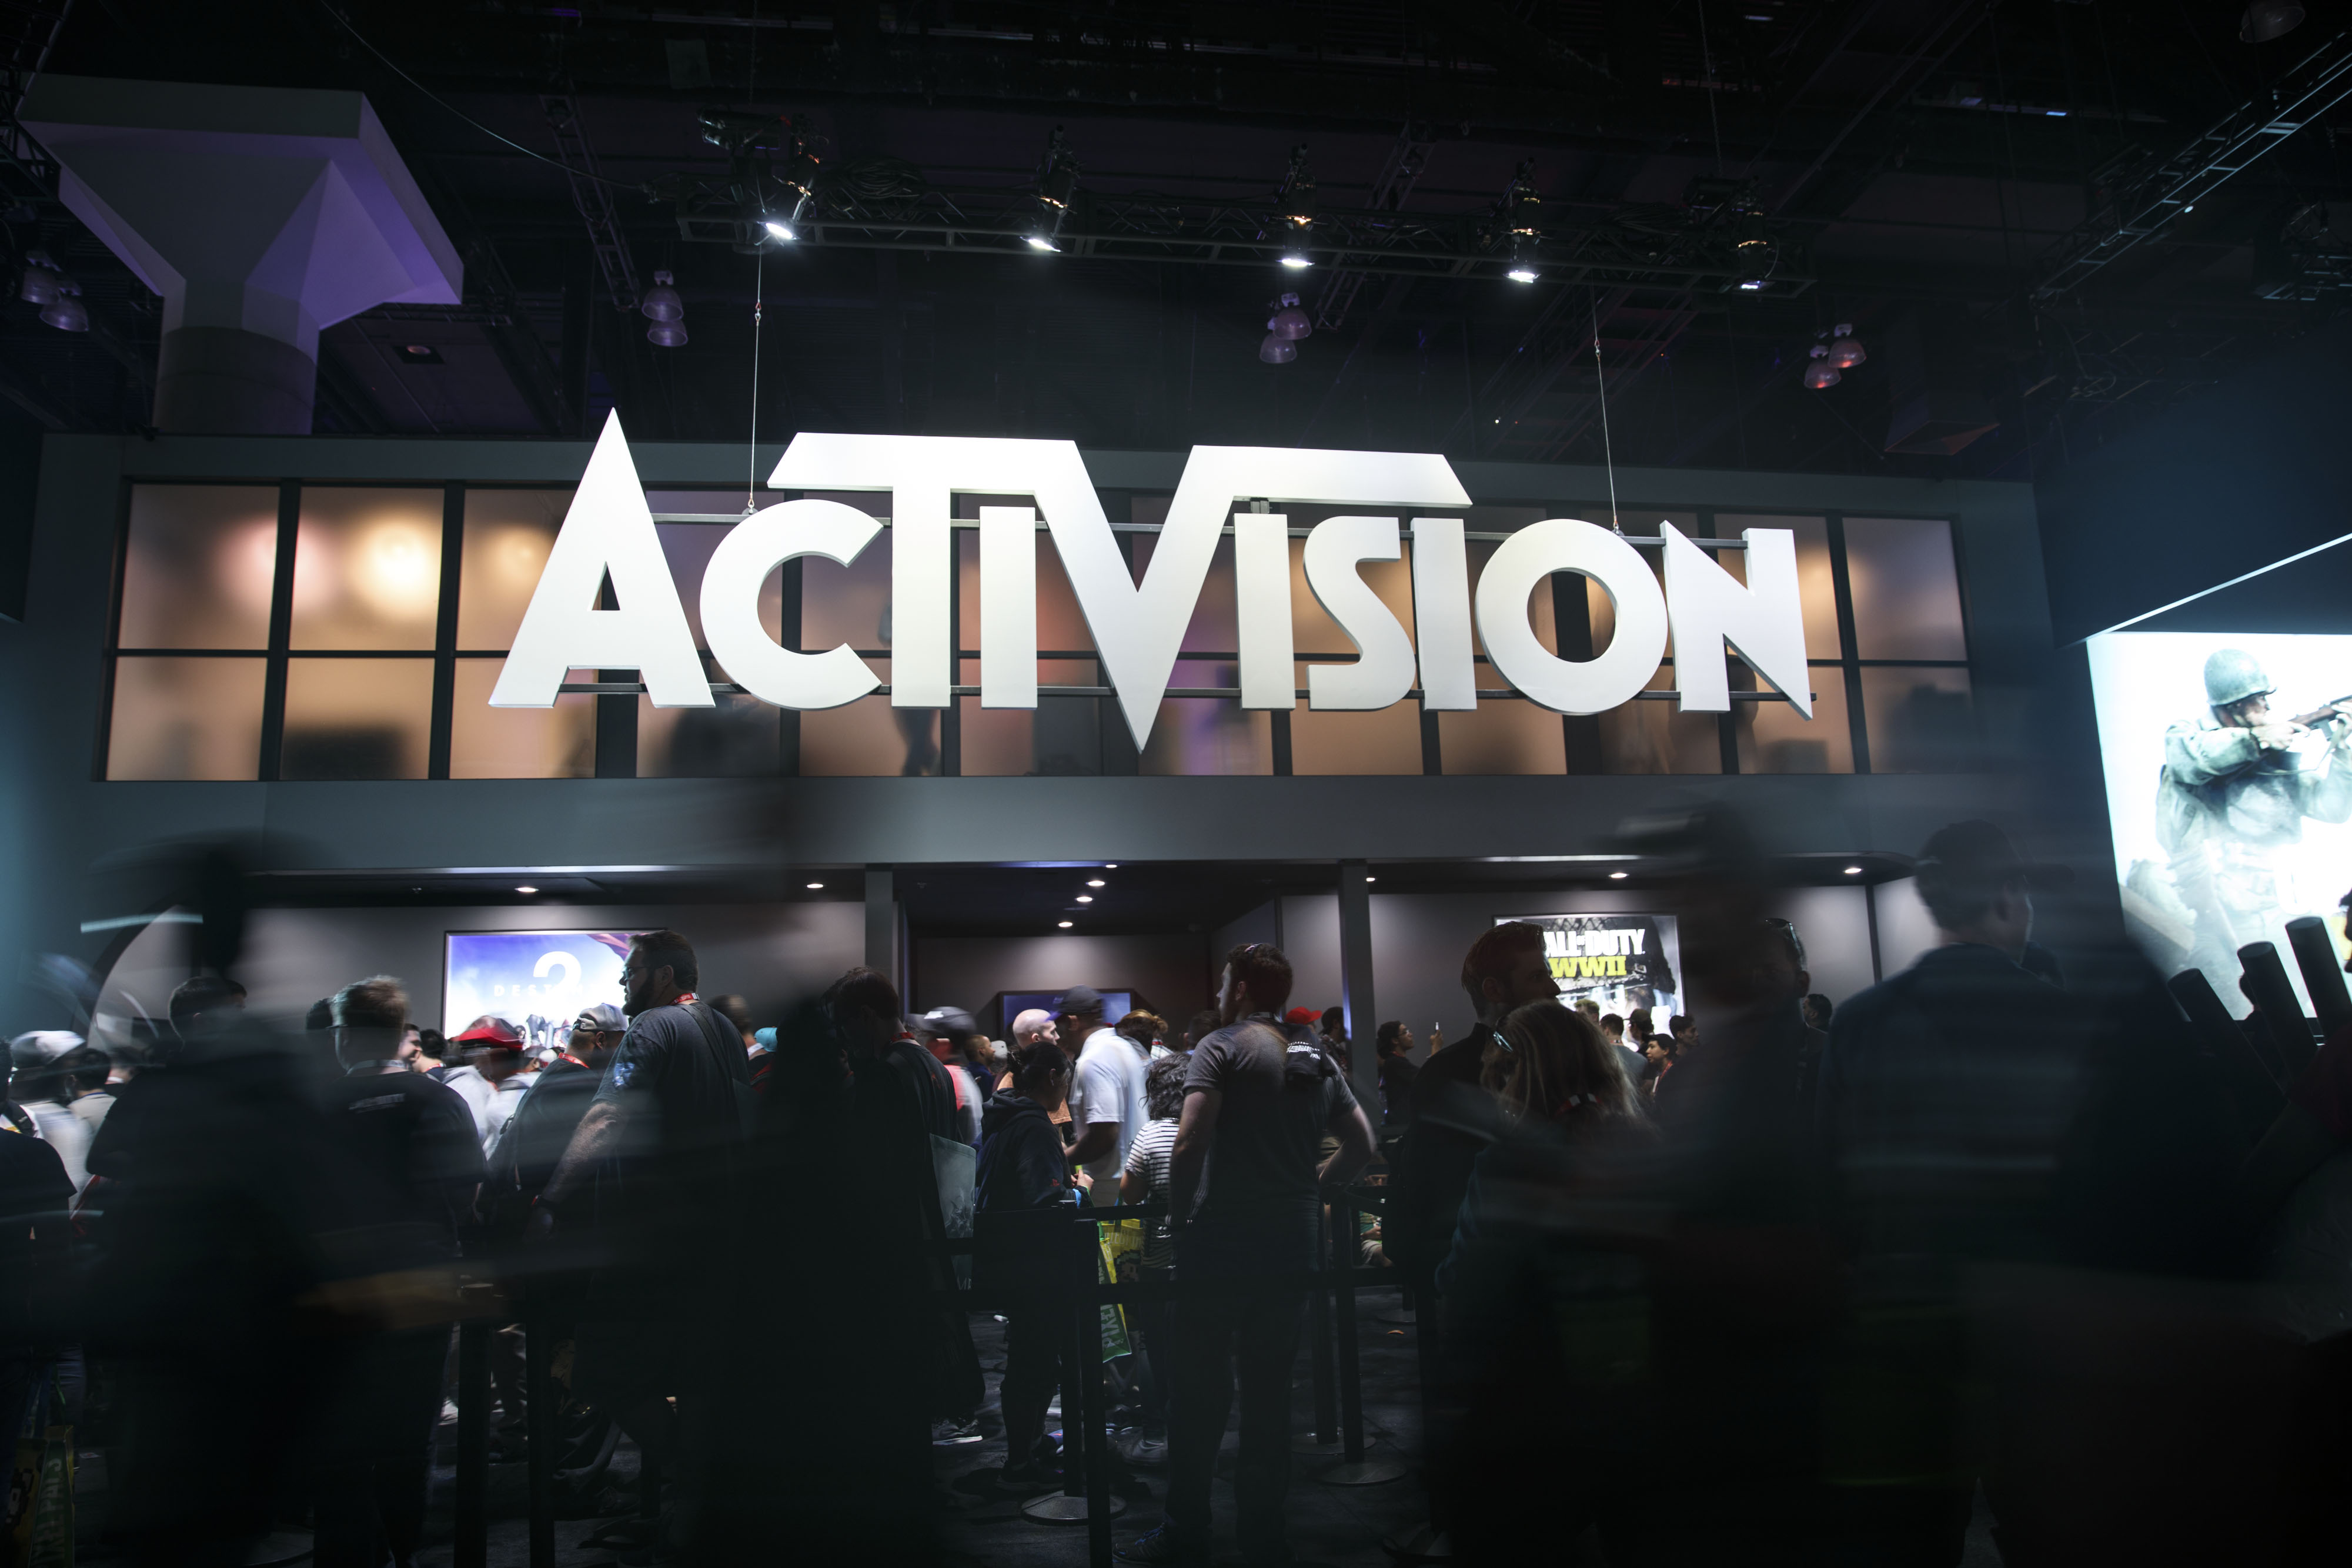 Microsoft's Activision deal has a 70% chance of being approved by